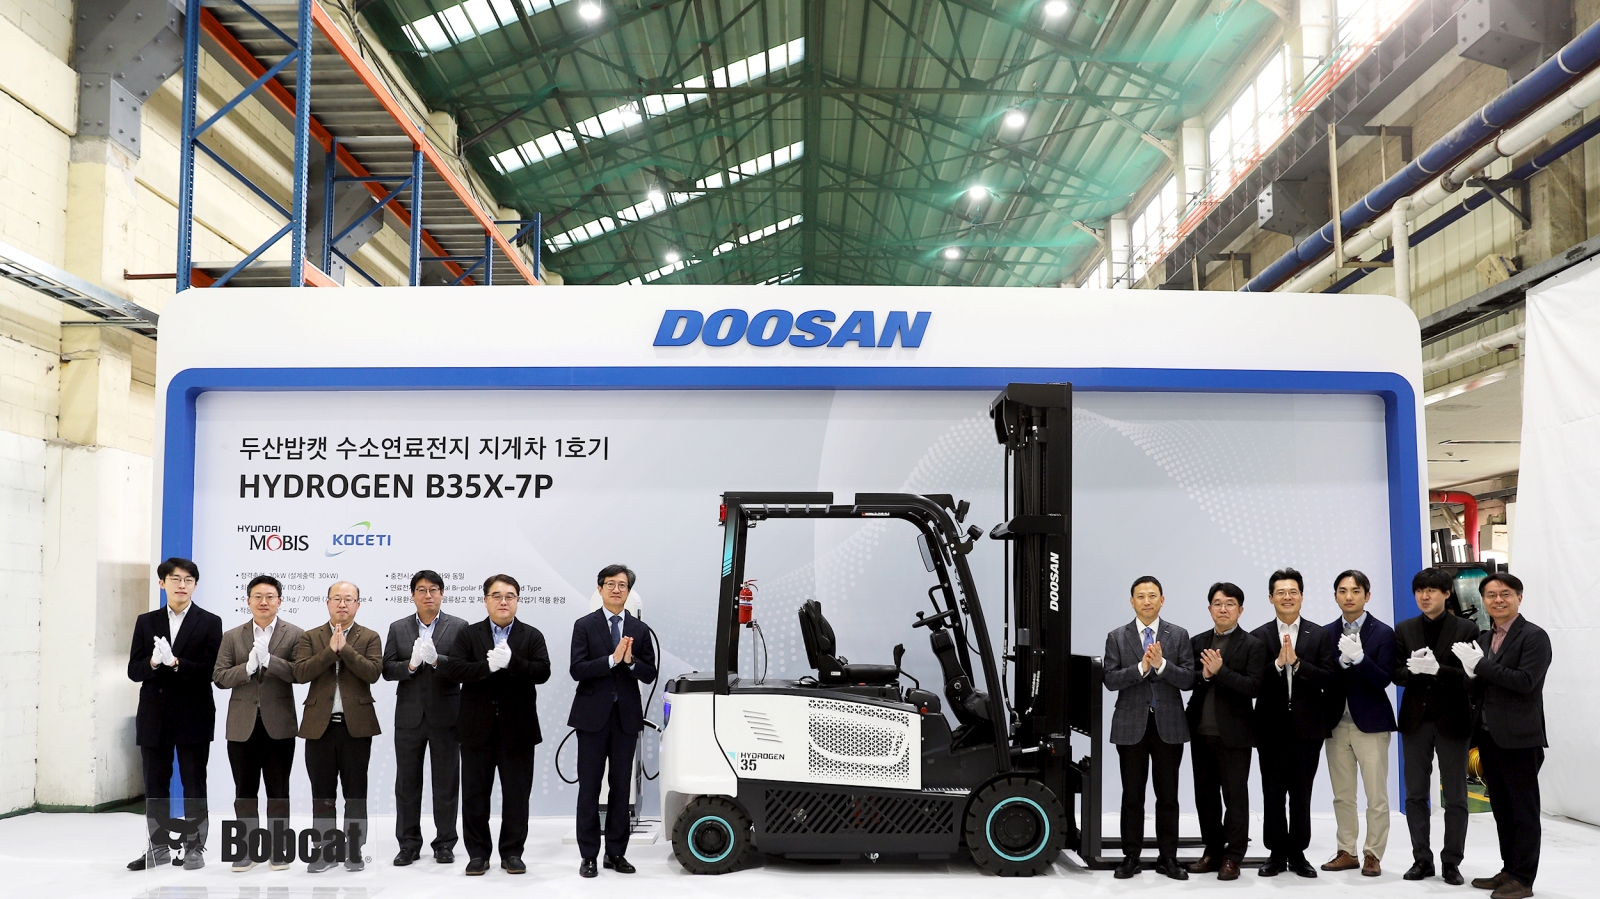 1&2. Park Hyung-won, president of Doosan Bobcat Korea (seventh from left), and Lee Chang-hum, Deputy Minister of Climate Change and Carbon Neutral Policy Office at the Ministry of Environment of ROK (sixth from left), celebrate the delivery of the first hydrogen forklift at Doosan Bobcat's Incheon forklift factory on Jan. 30. (Kim Hee-soo, fourth from left, Director of the Korea Construction Equipment Technology Institute (KOCETI), and Geum Young-beom, eighth from left, Executive Director at Hyundai Mobis)